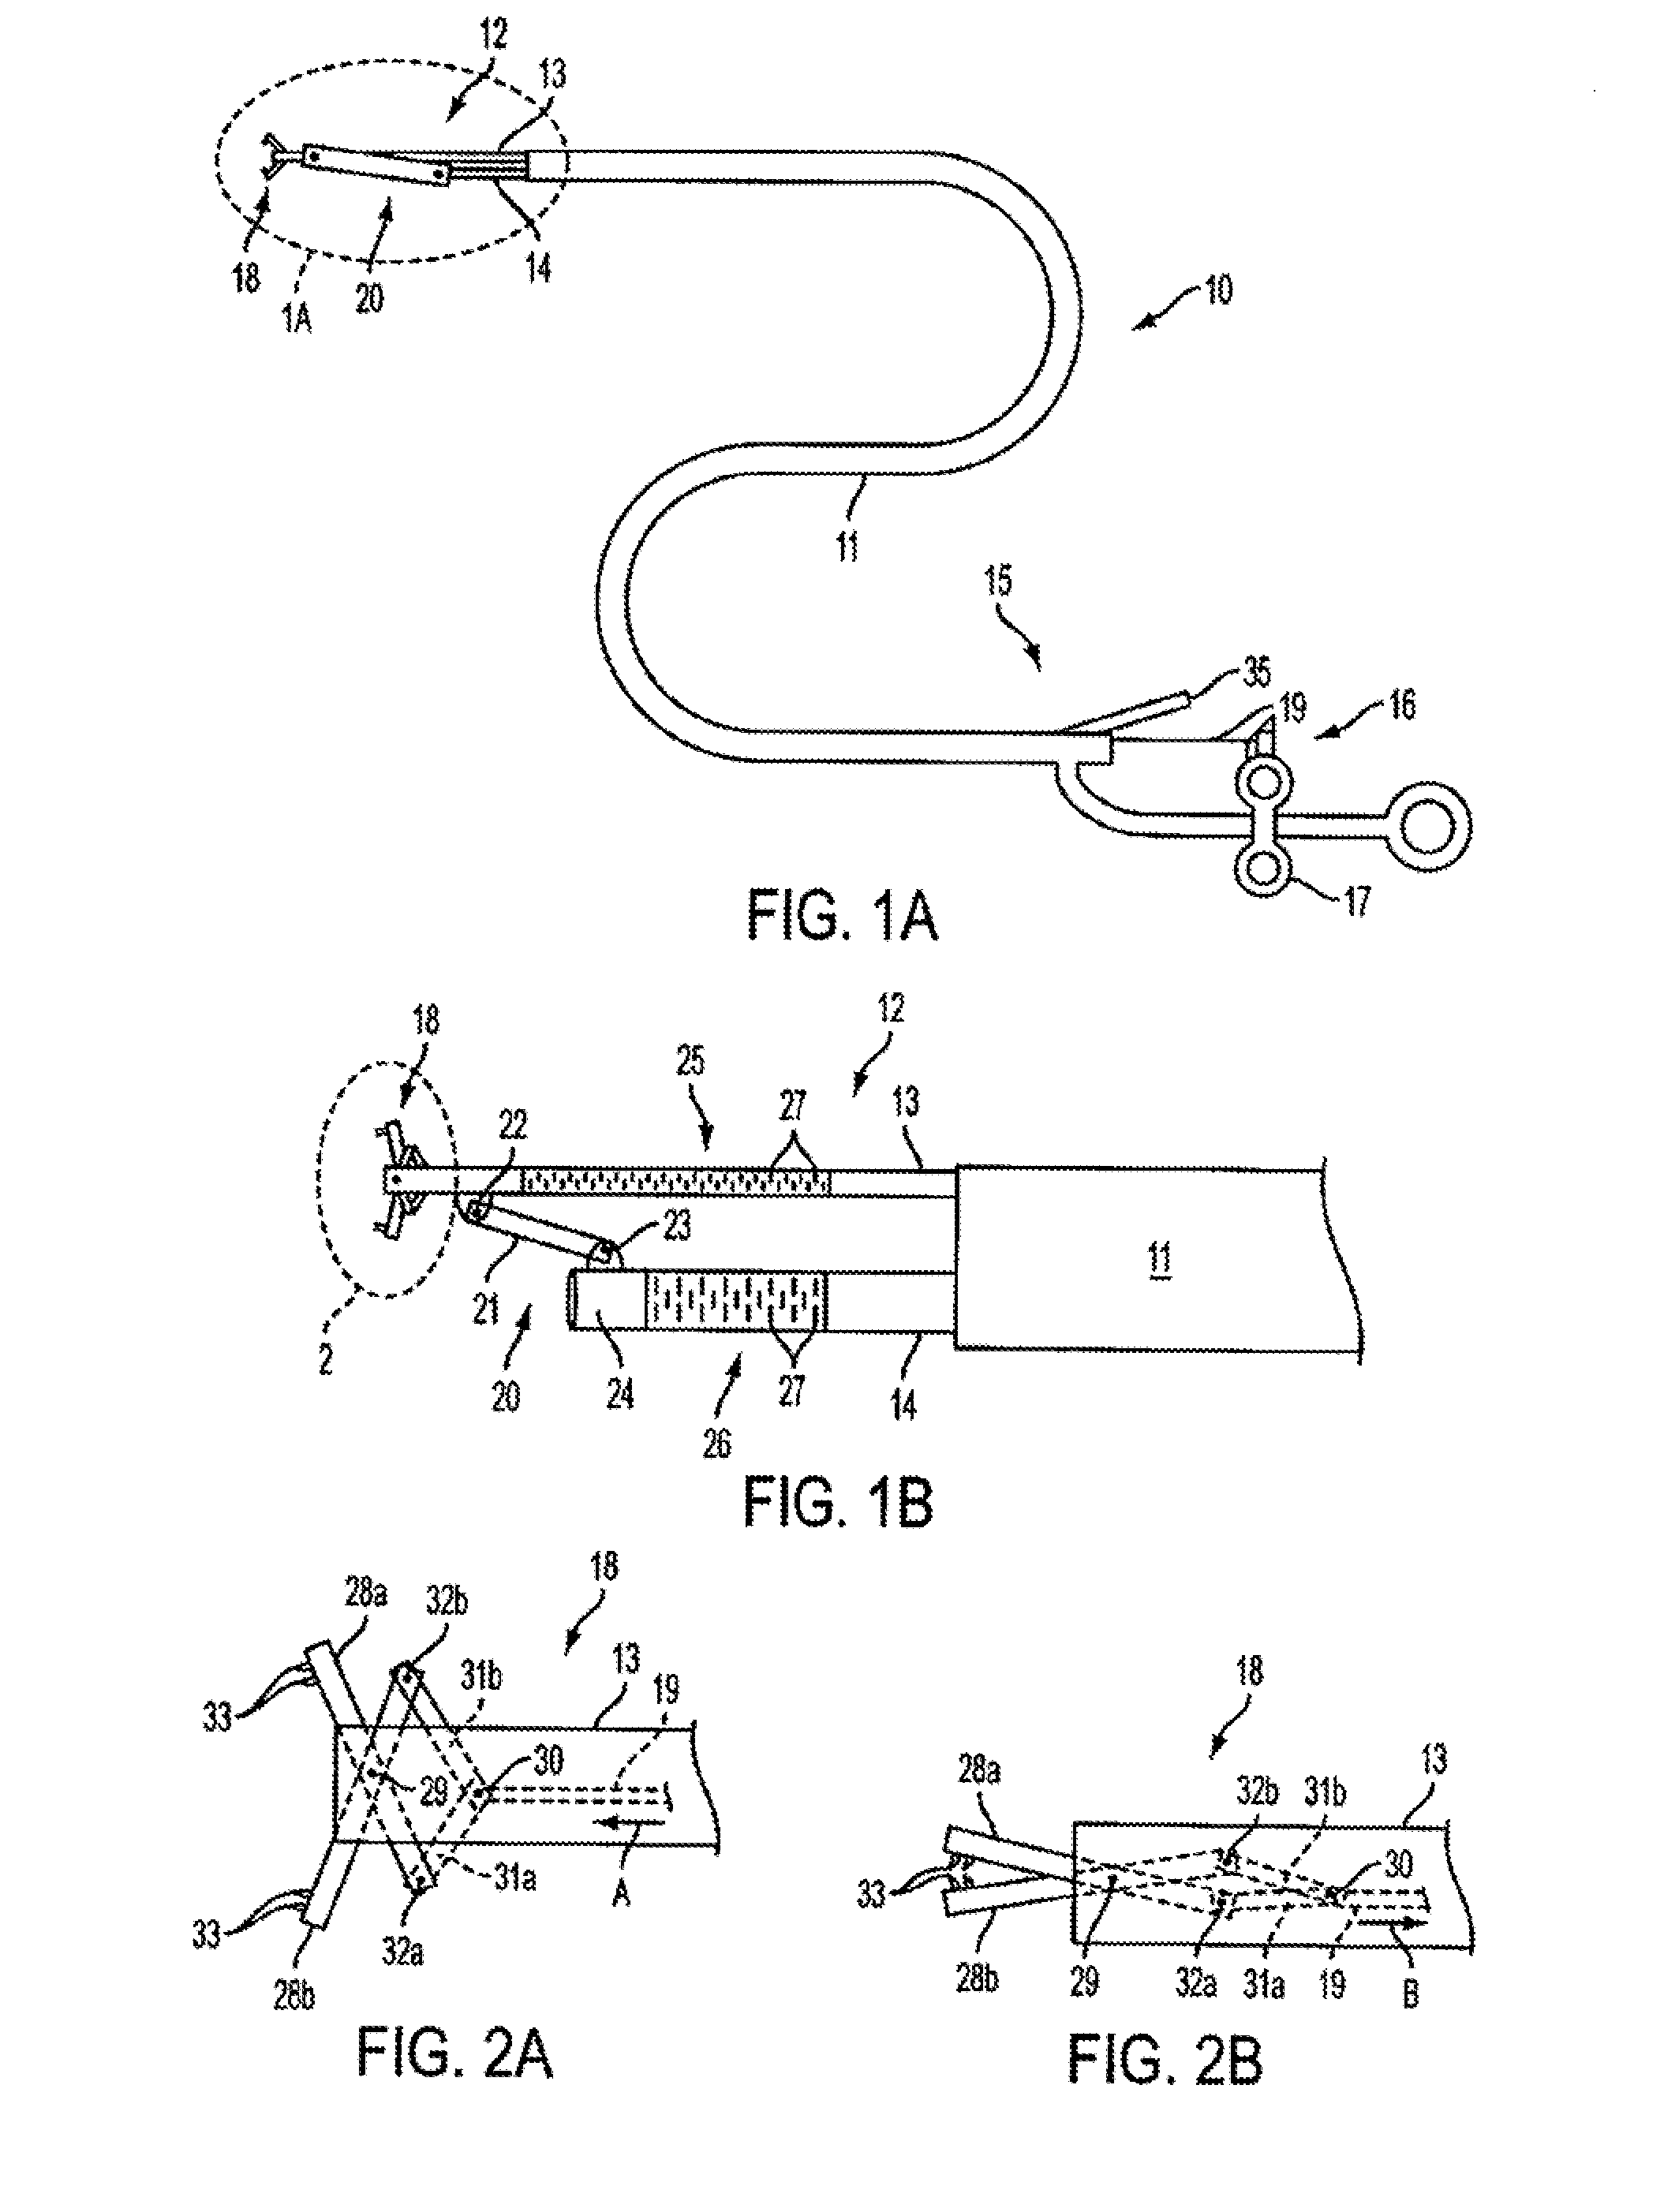 Apparatus and methods for forming and securing gastrointestinal tissue folds